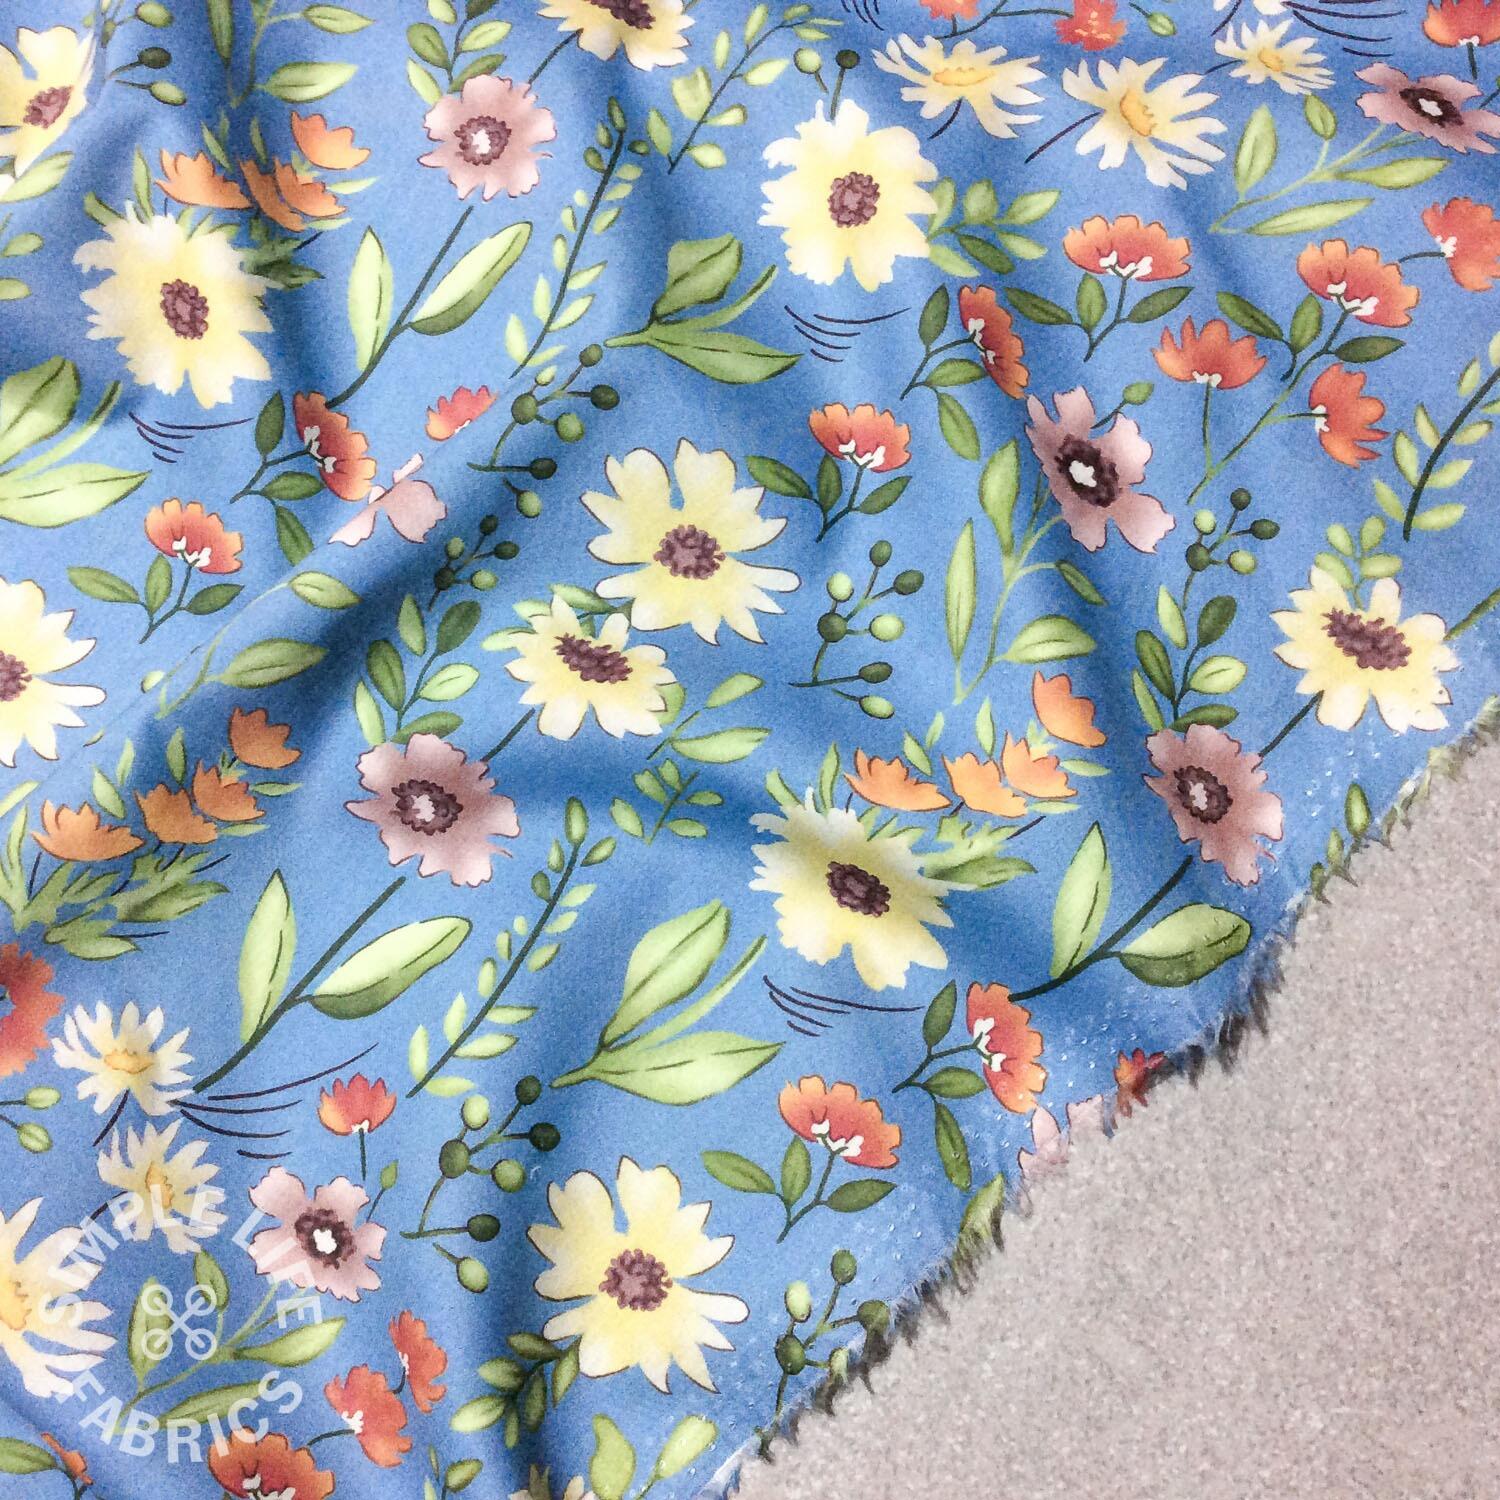 Floral print wildflowers blue cotton lawn fabric